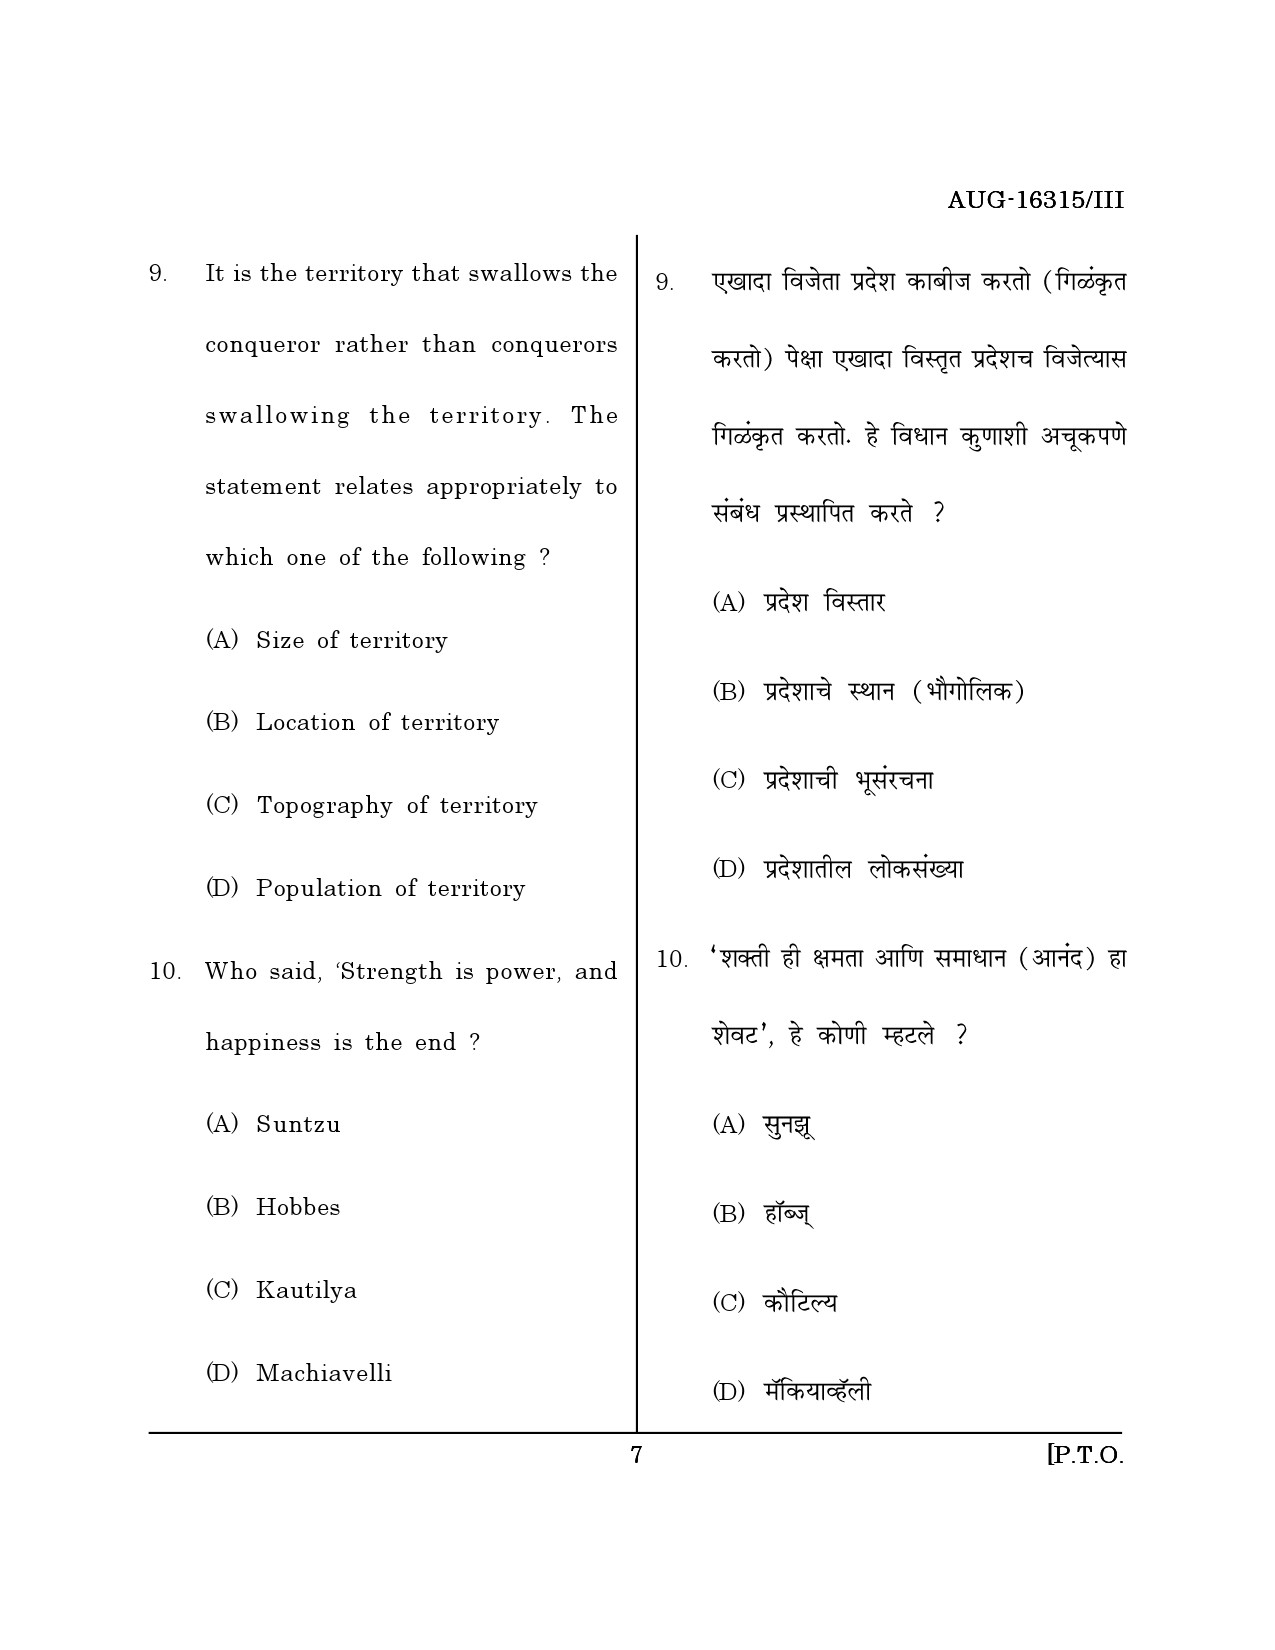 Maharashtra SET Defence and Strategic Studies Question Paper III August 2015 6